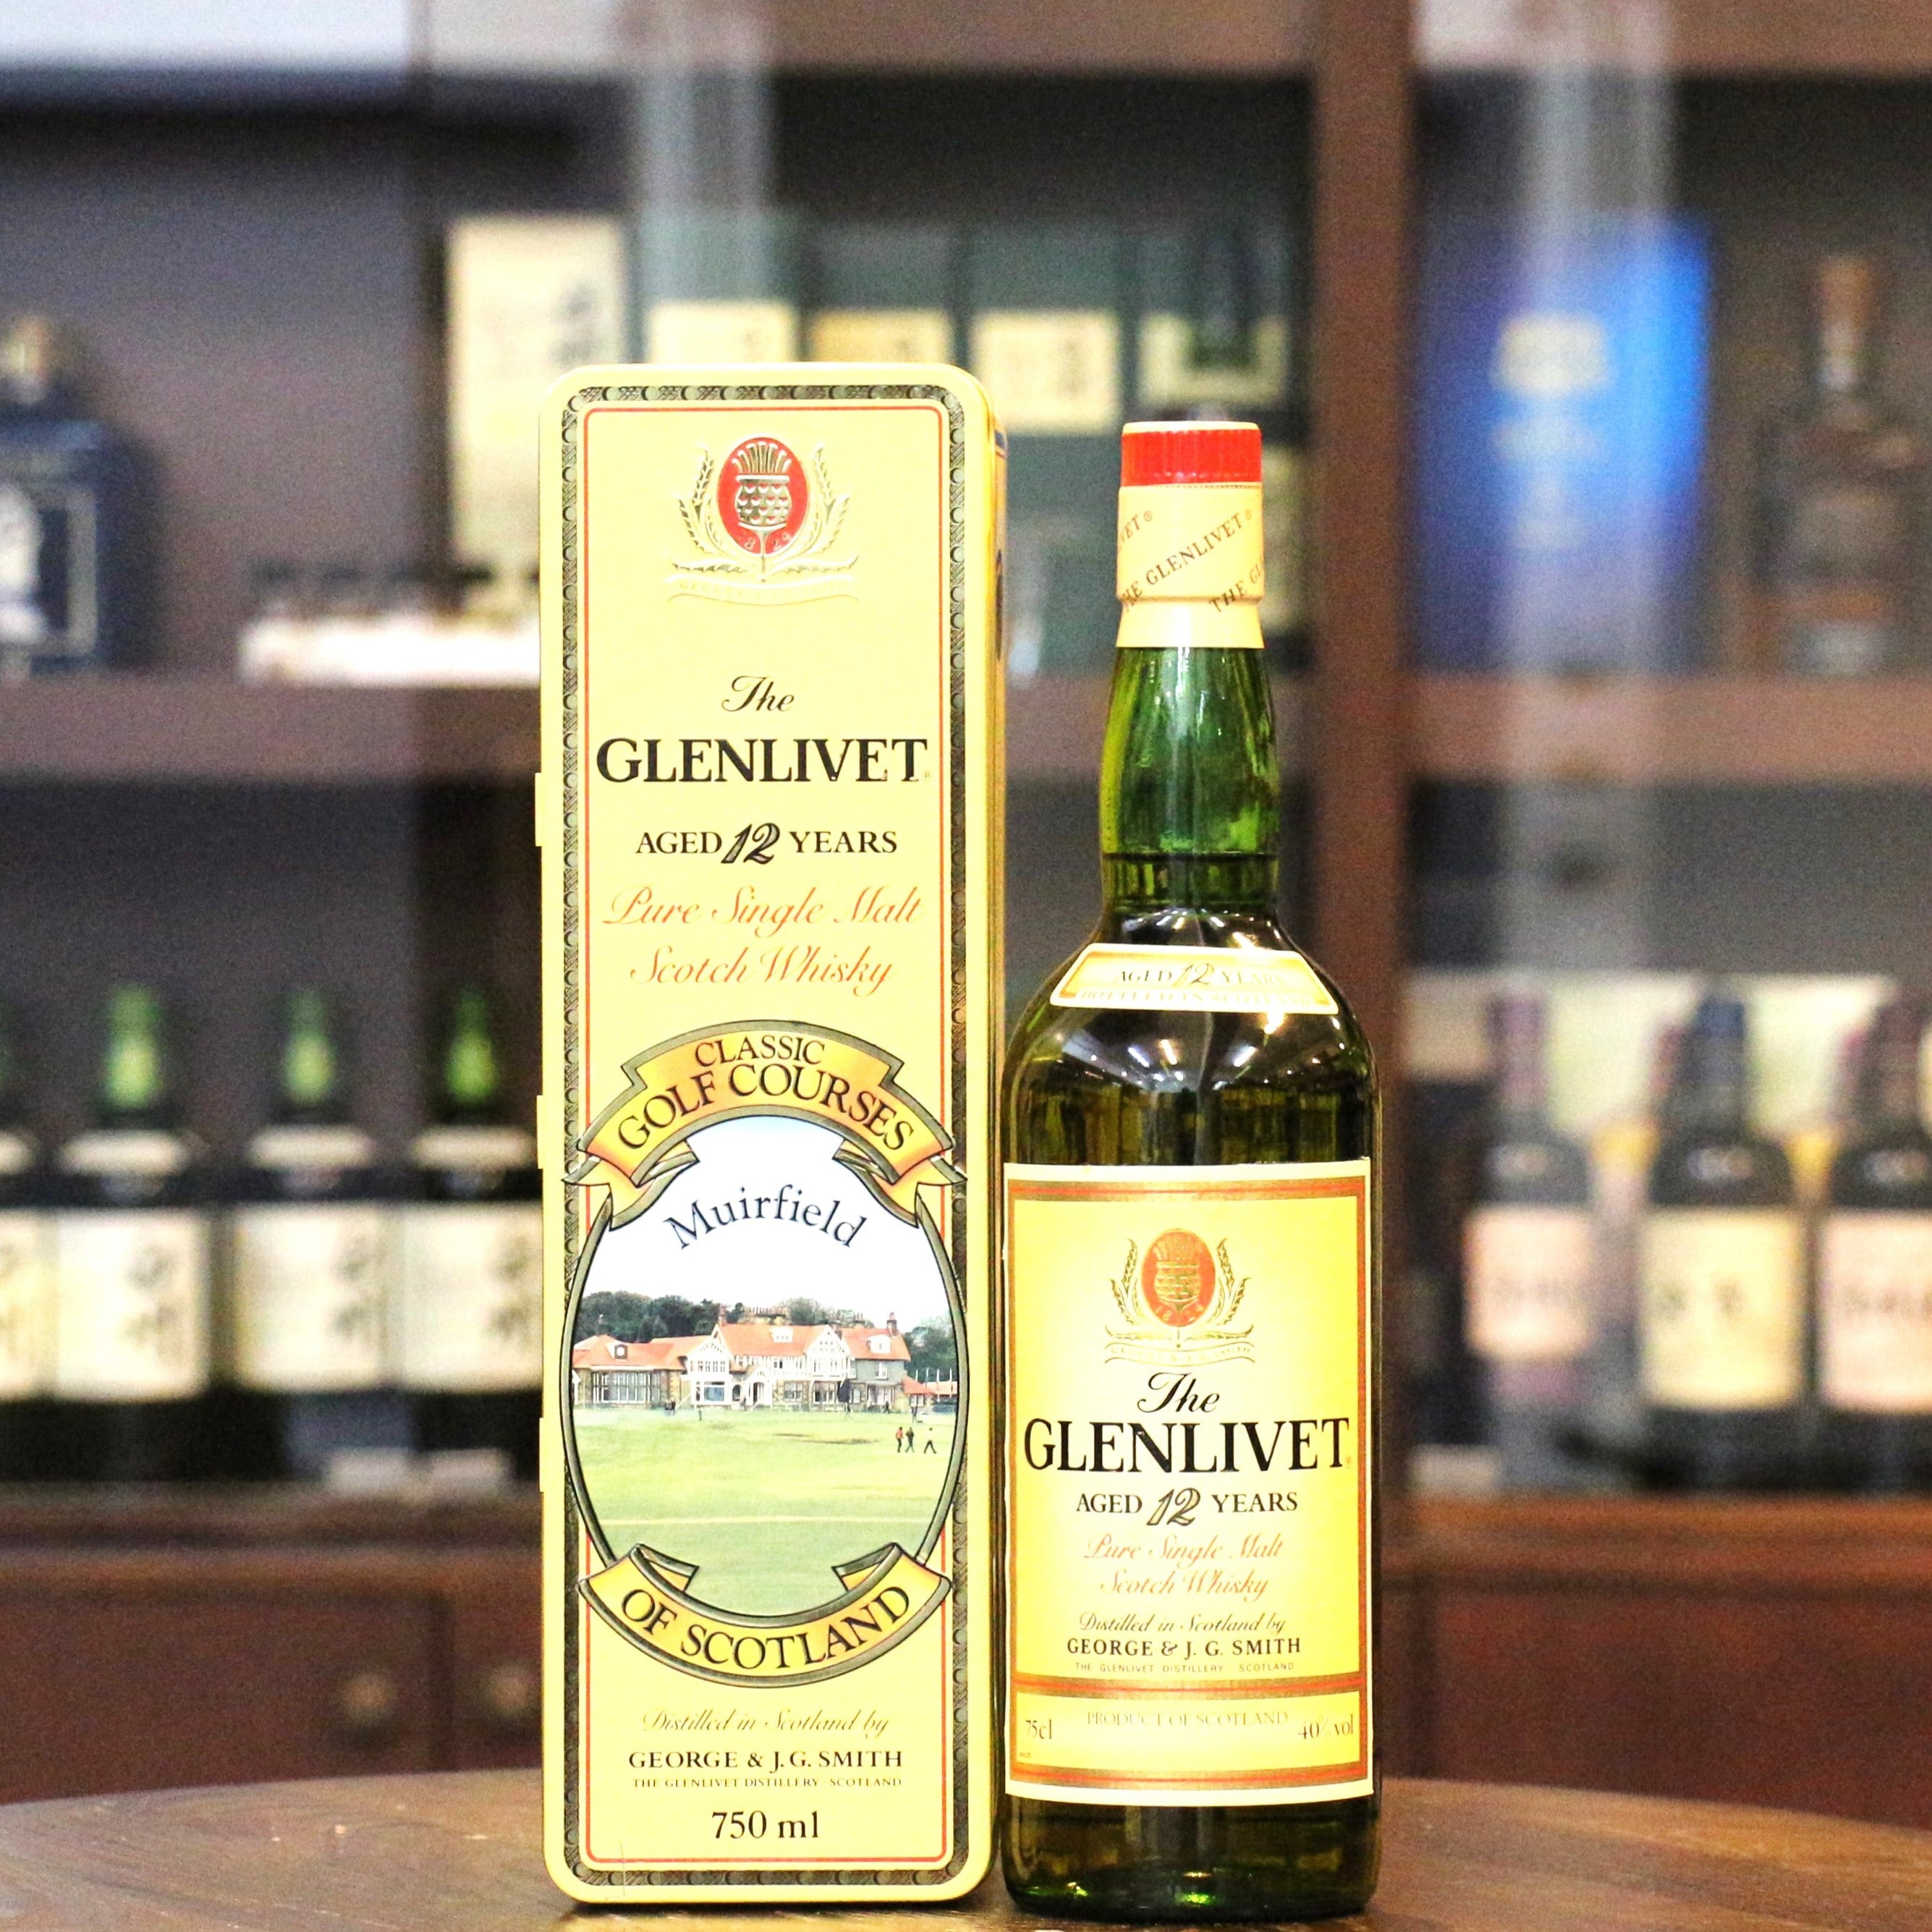 Glenlivet 12 Years Old Classic Golf Courses of Scotland 'Muirfield' Pure Single Malt Scotch Whisky